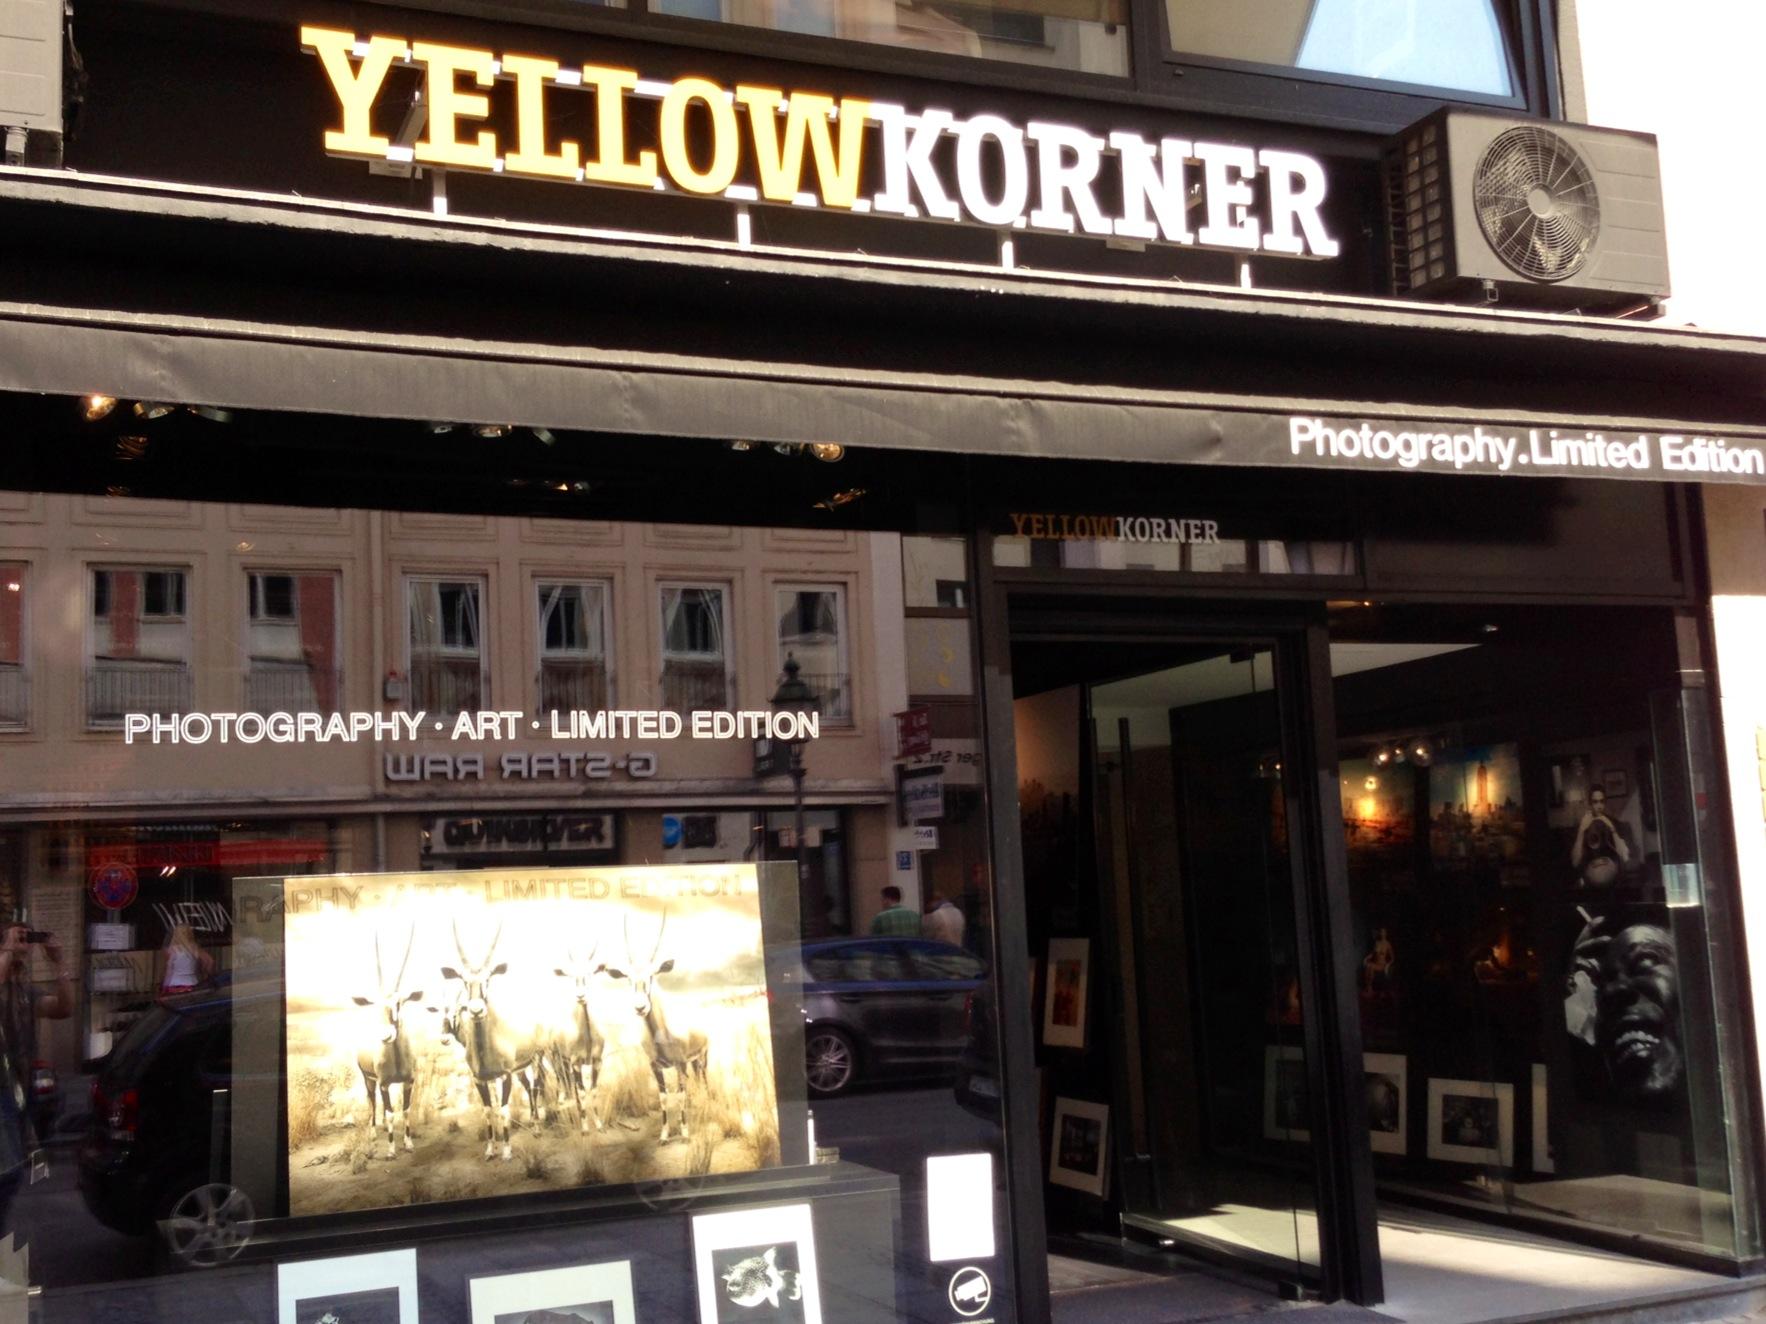 Cover image of this place Yellow Korner